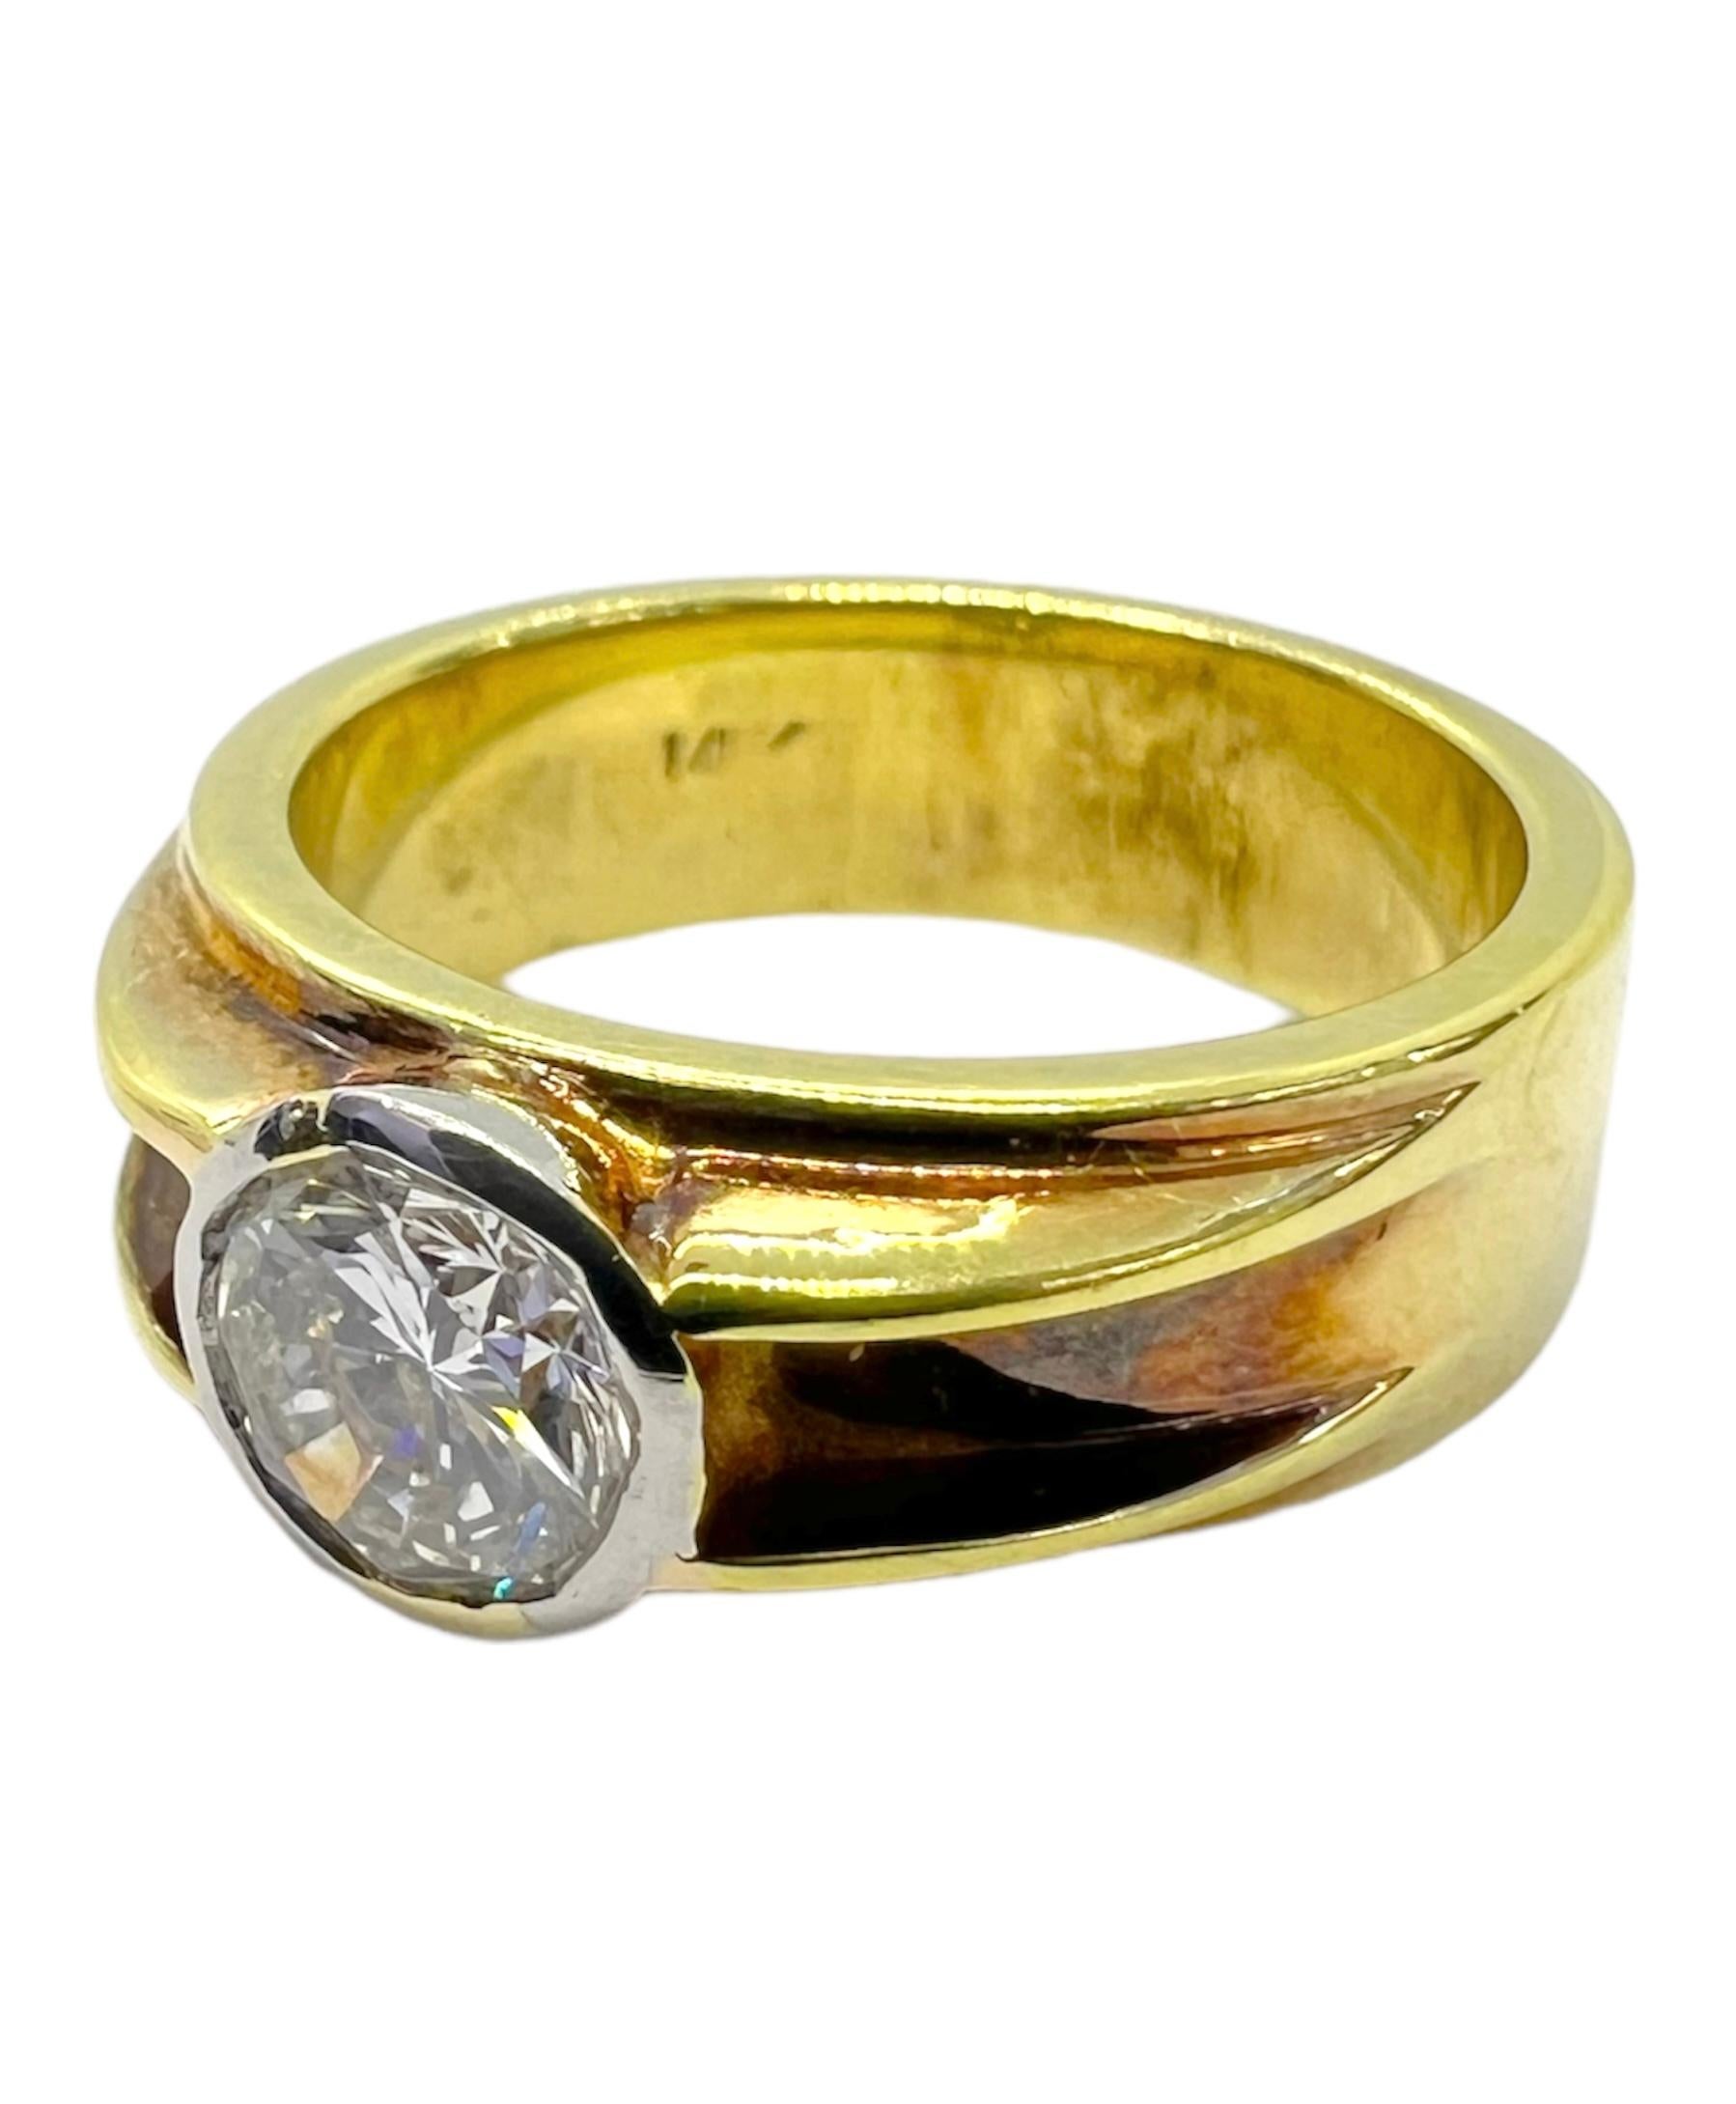 14K yellow gold ring with round center diamond.

Sophia D by Joseph Dardashti LTD has been known worldwide for 35 years and are inspired by classic Art Deco design that merges with modern manufacturing techniques.  